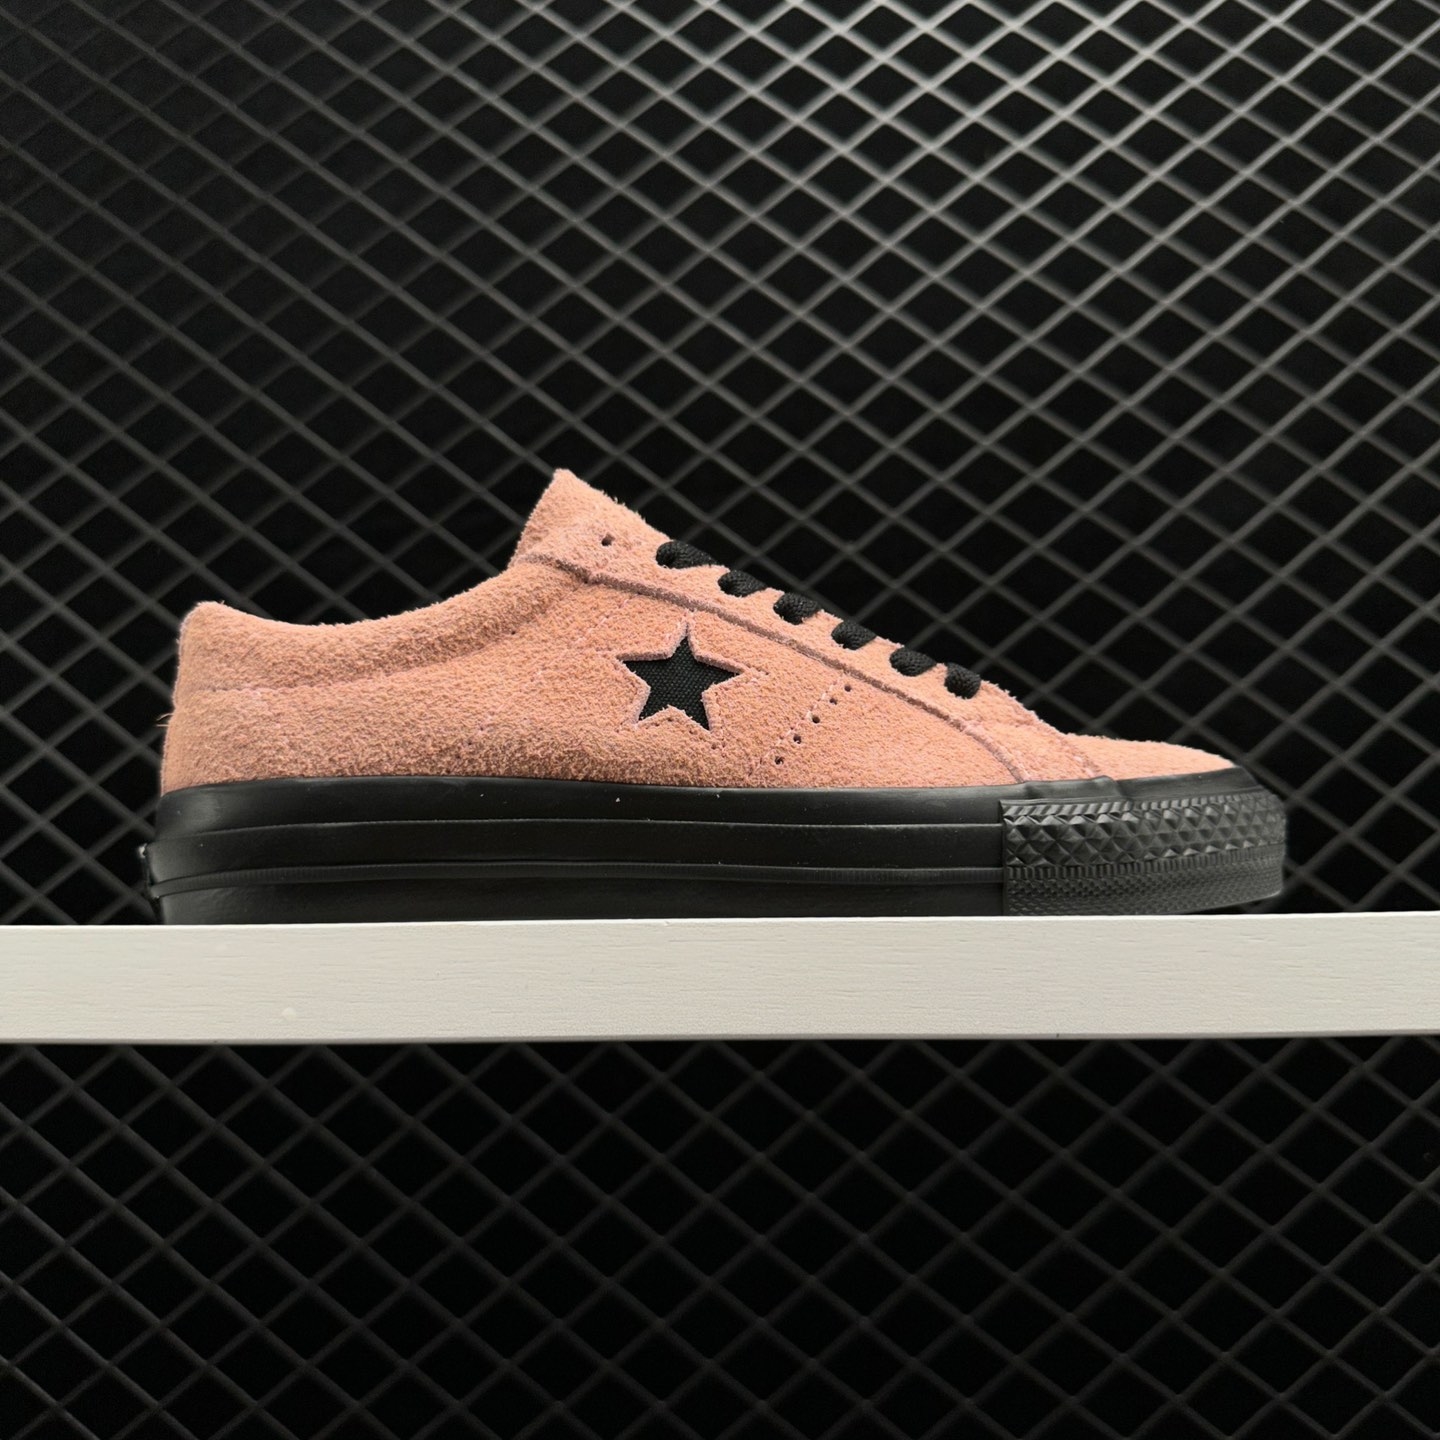 Converse One Star Pro 'Pink Black' A05267C - Stylish and Durable Footwear